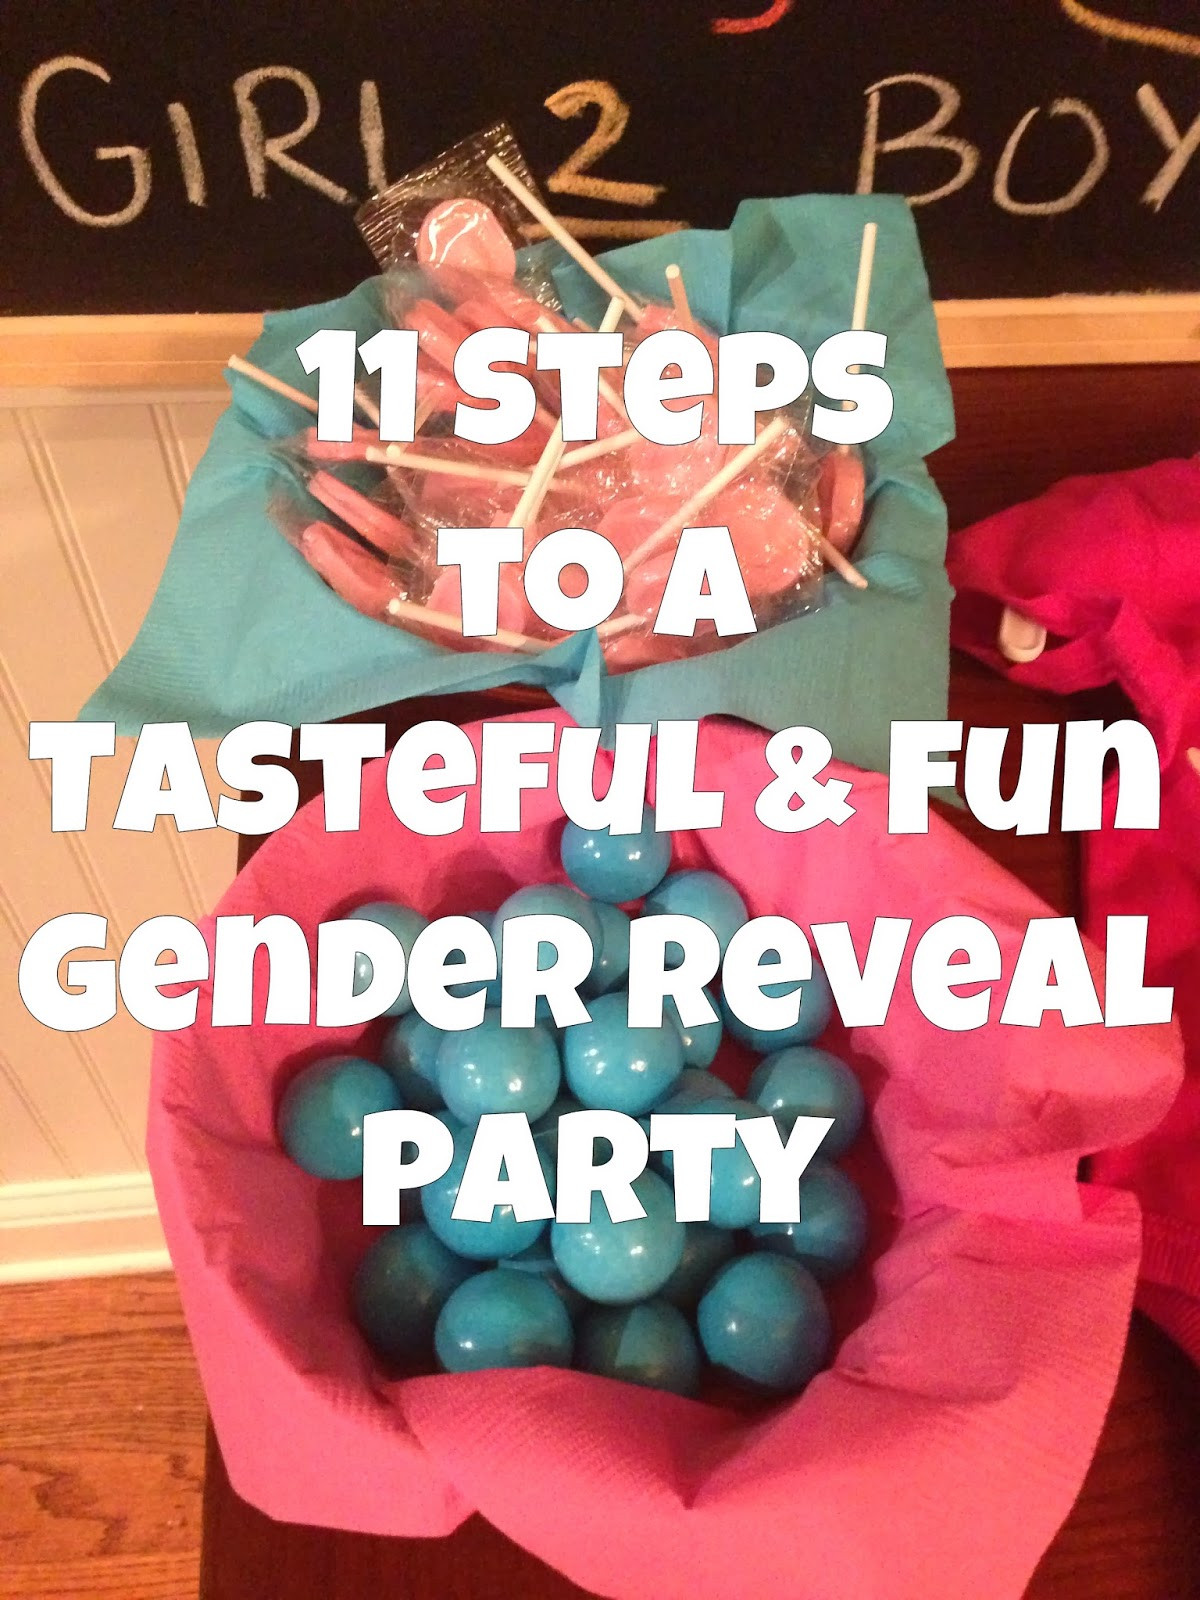 Cute Ideas For A Gender Reveal Party
 Mother to Kings 11 Steps to a Tasteful & Fun Gender Reveal Party